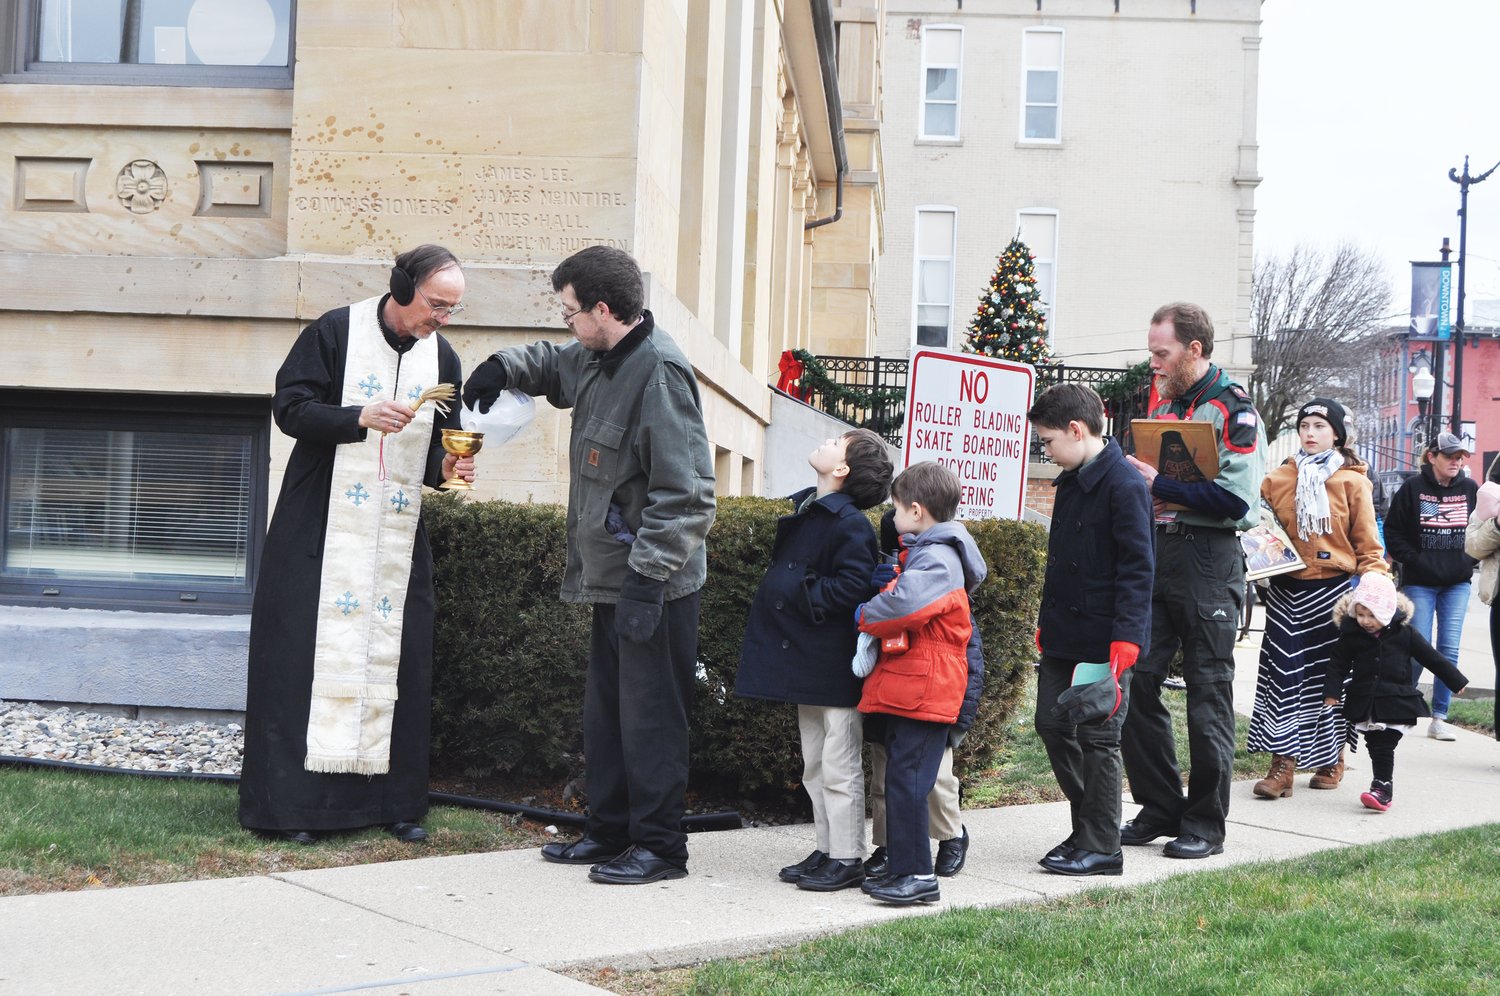 Nick Vancleave pours water into a bowl held by Father Alexis Miller  of Holy Transfiguration Orthodox Church in a blessing of the Montgomery County Courthouse during a Pray Together for America event Wednesday. In remarks, Miller said the nation was facing a